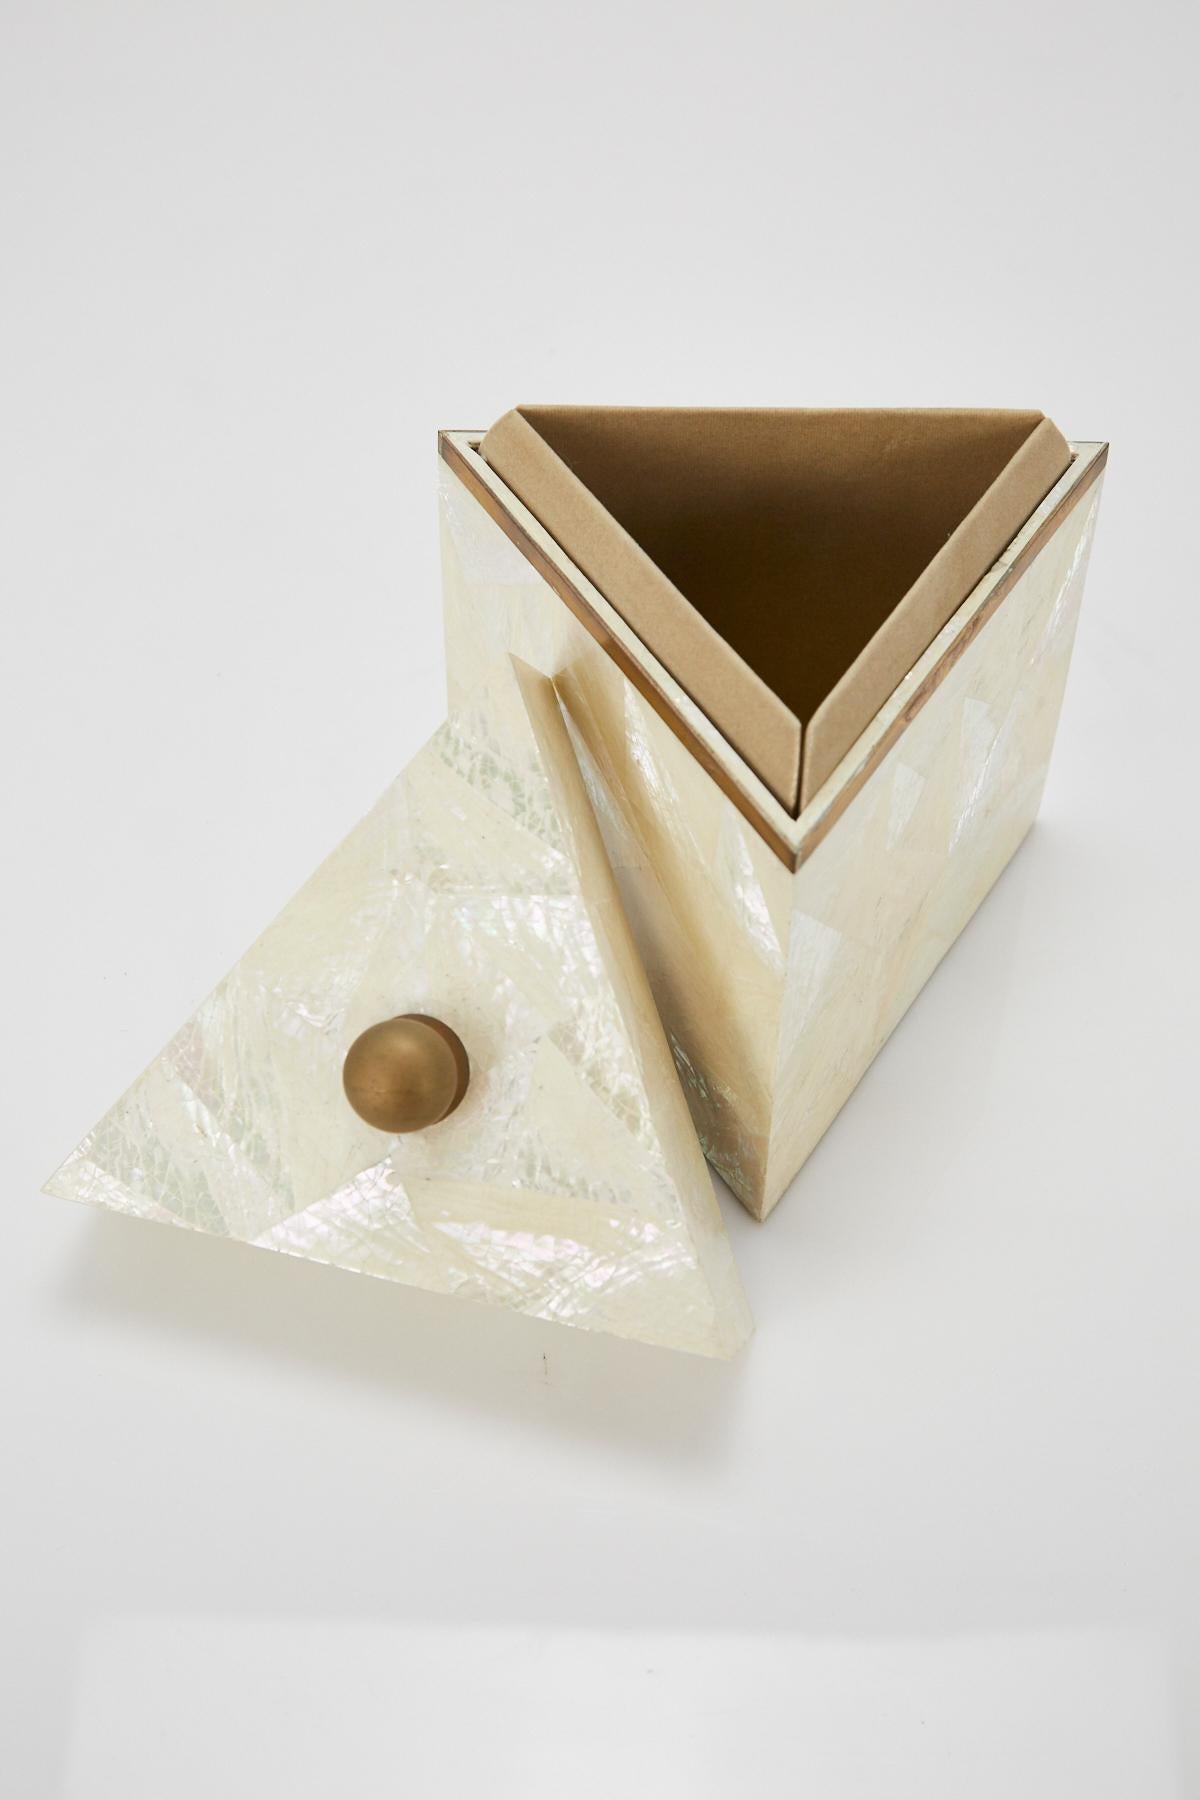 Tall Triangular Postmodern Tessellated Stone and Seashell Lidded Box, 1990s In Excellent Condition For Sale In Los Angeles, CA